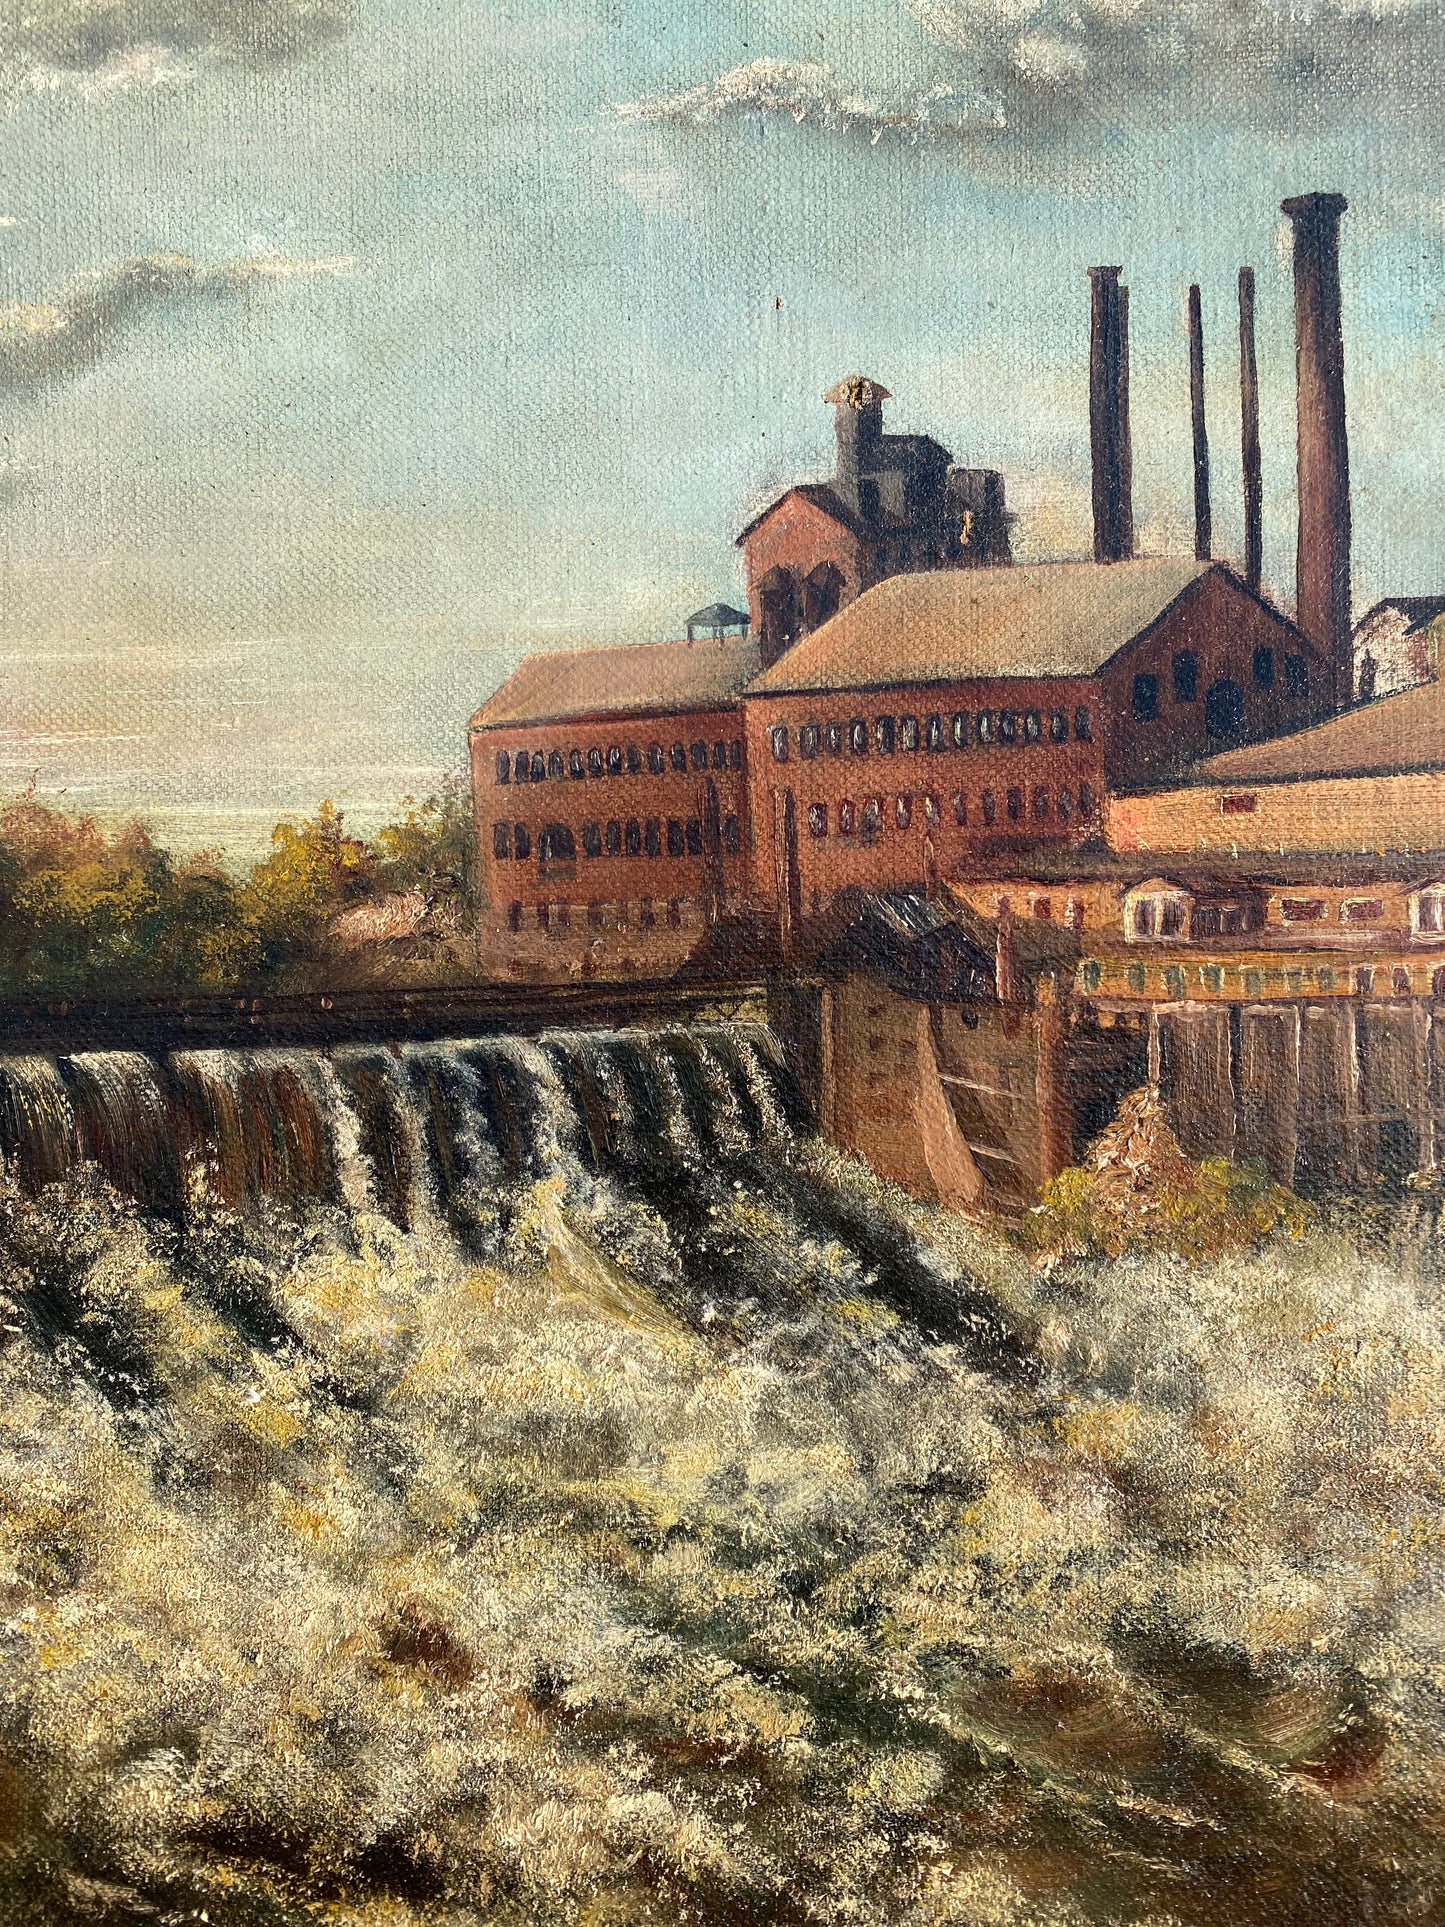 Eau Claire Paper Mill - Local Artist “Small”